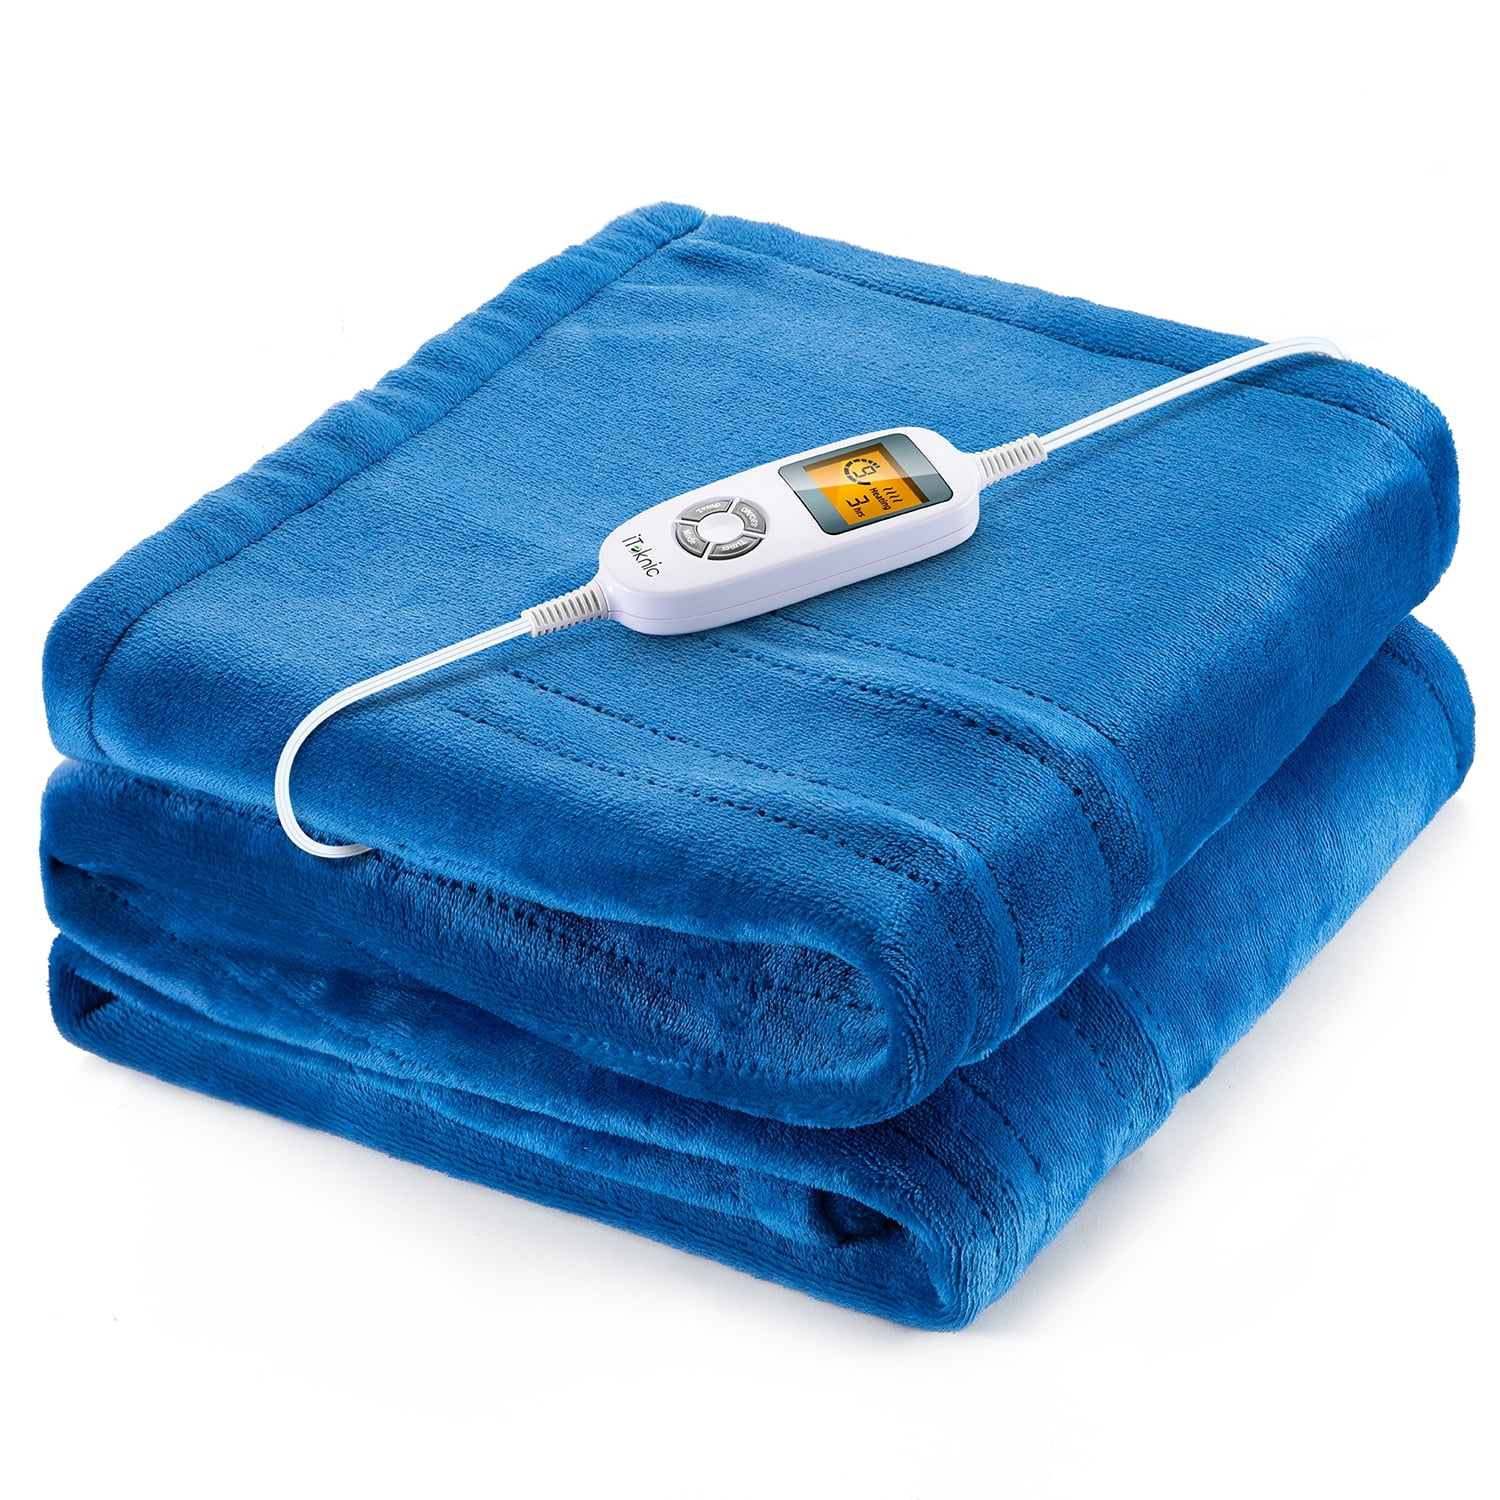 10 Heating Levels iTeknic Heated Blanket 60"x 50" Flannel Electric Throw Blue 